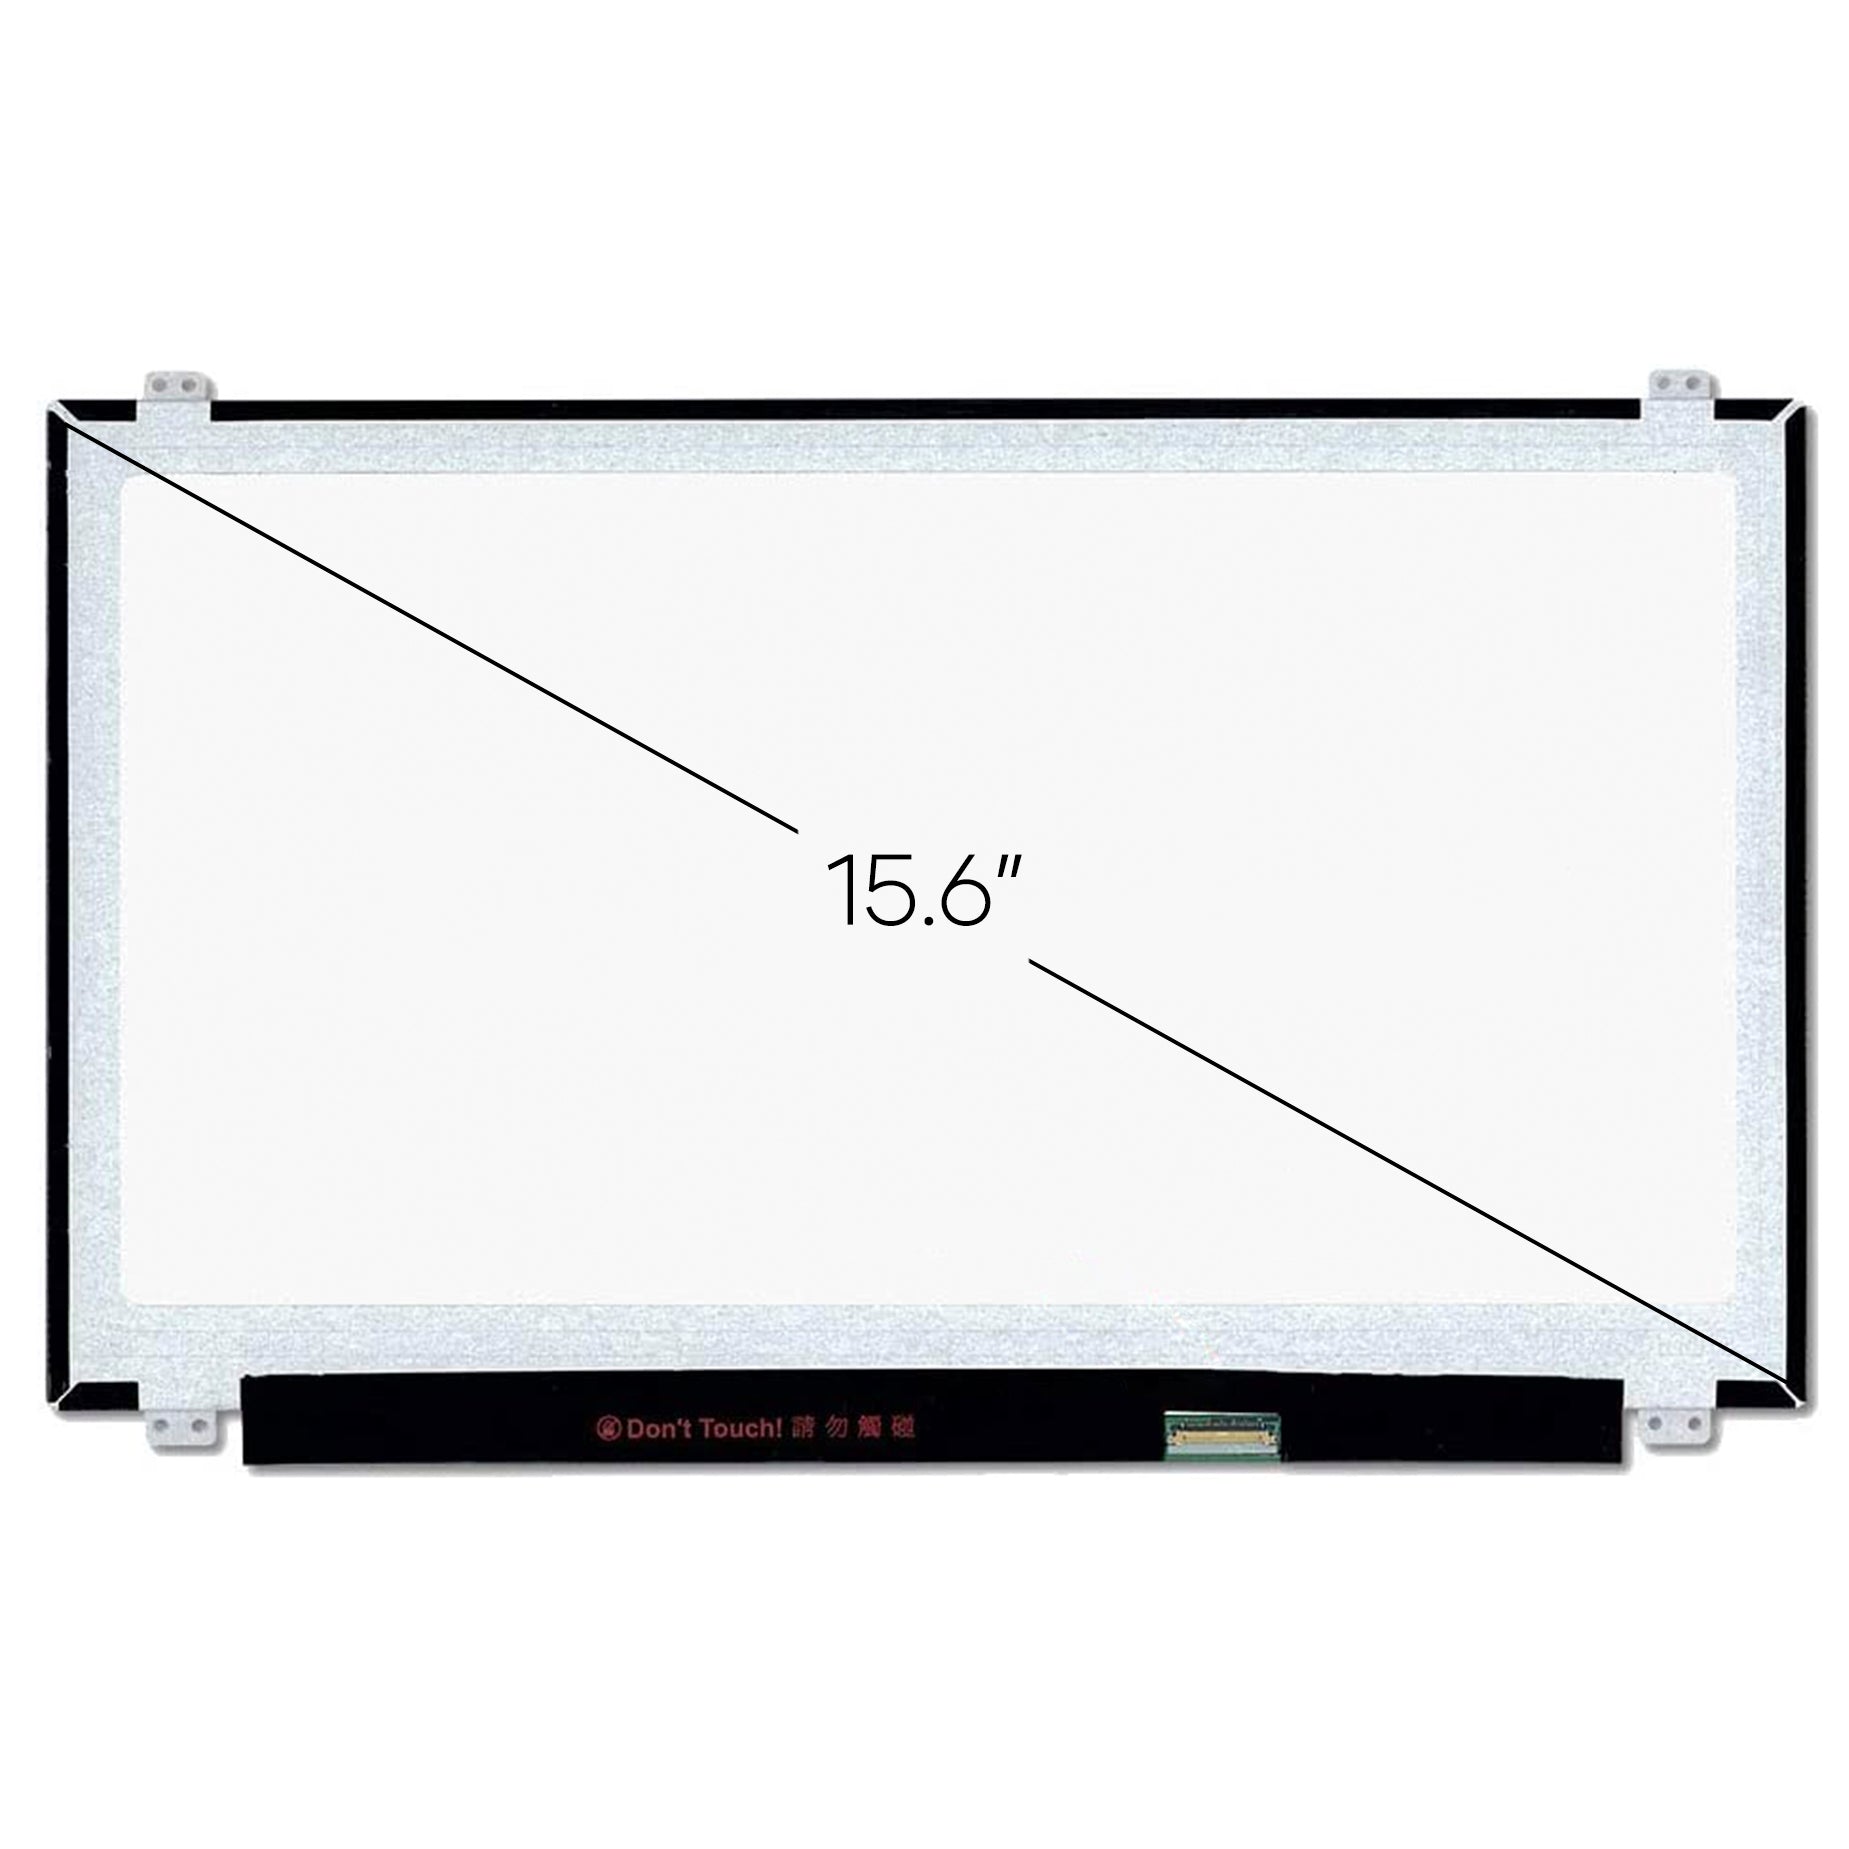 Screen Replacement for B156HTN03.3 FHD 1920x1080 Matte LCD LED Display